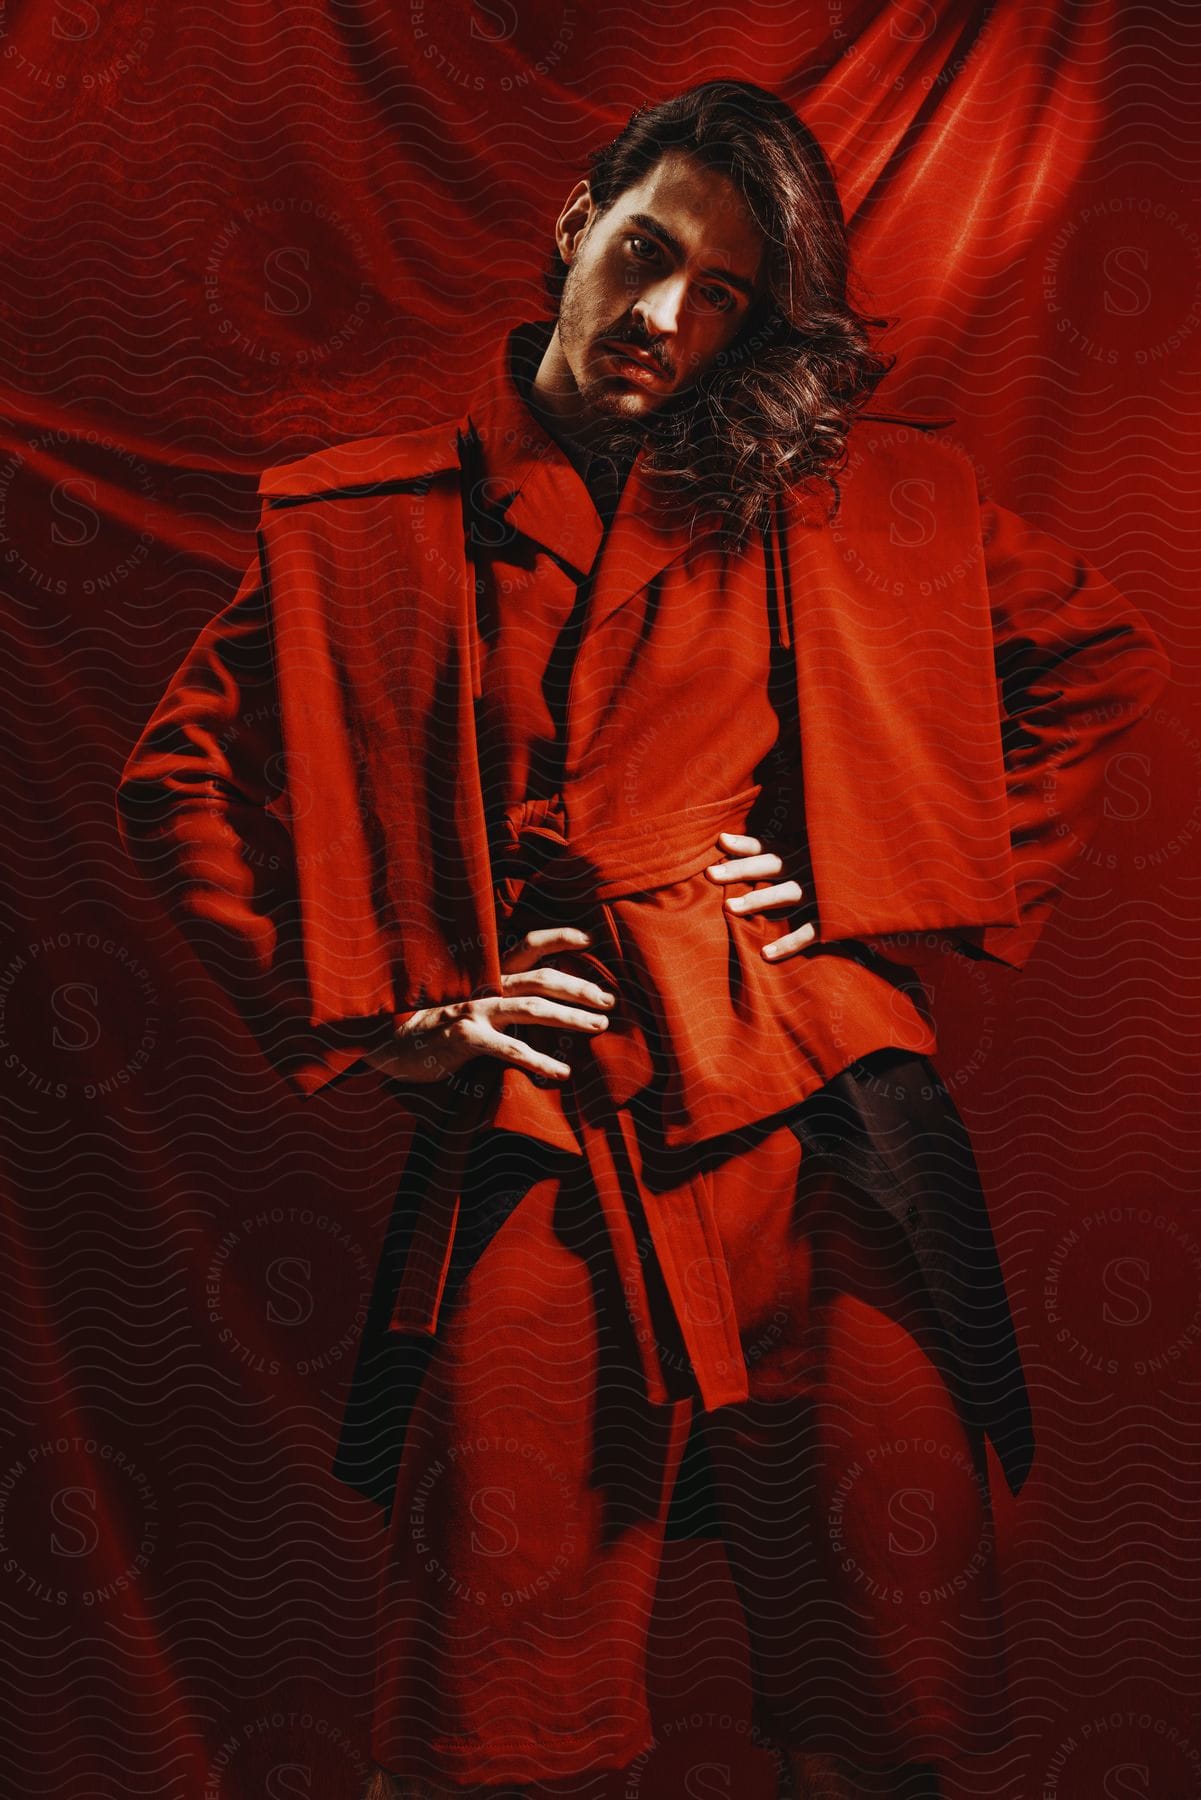 Model with long hair wearing red garments